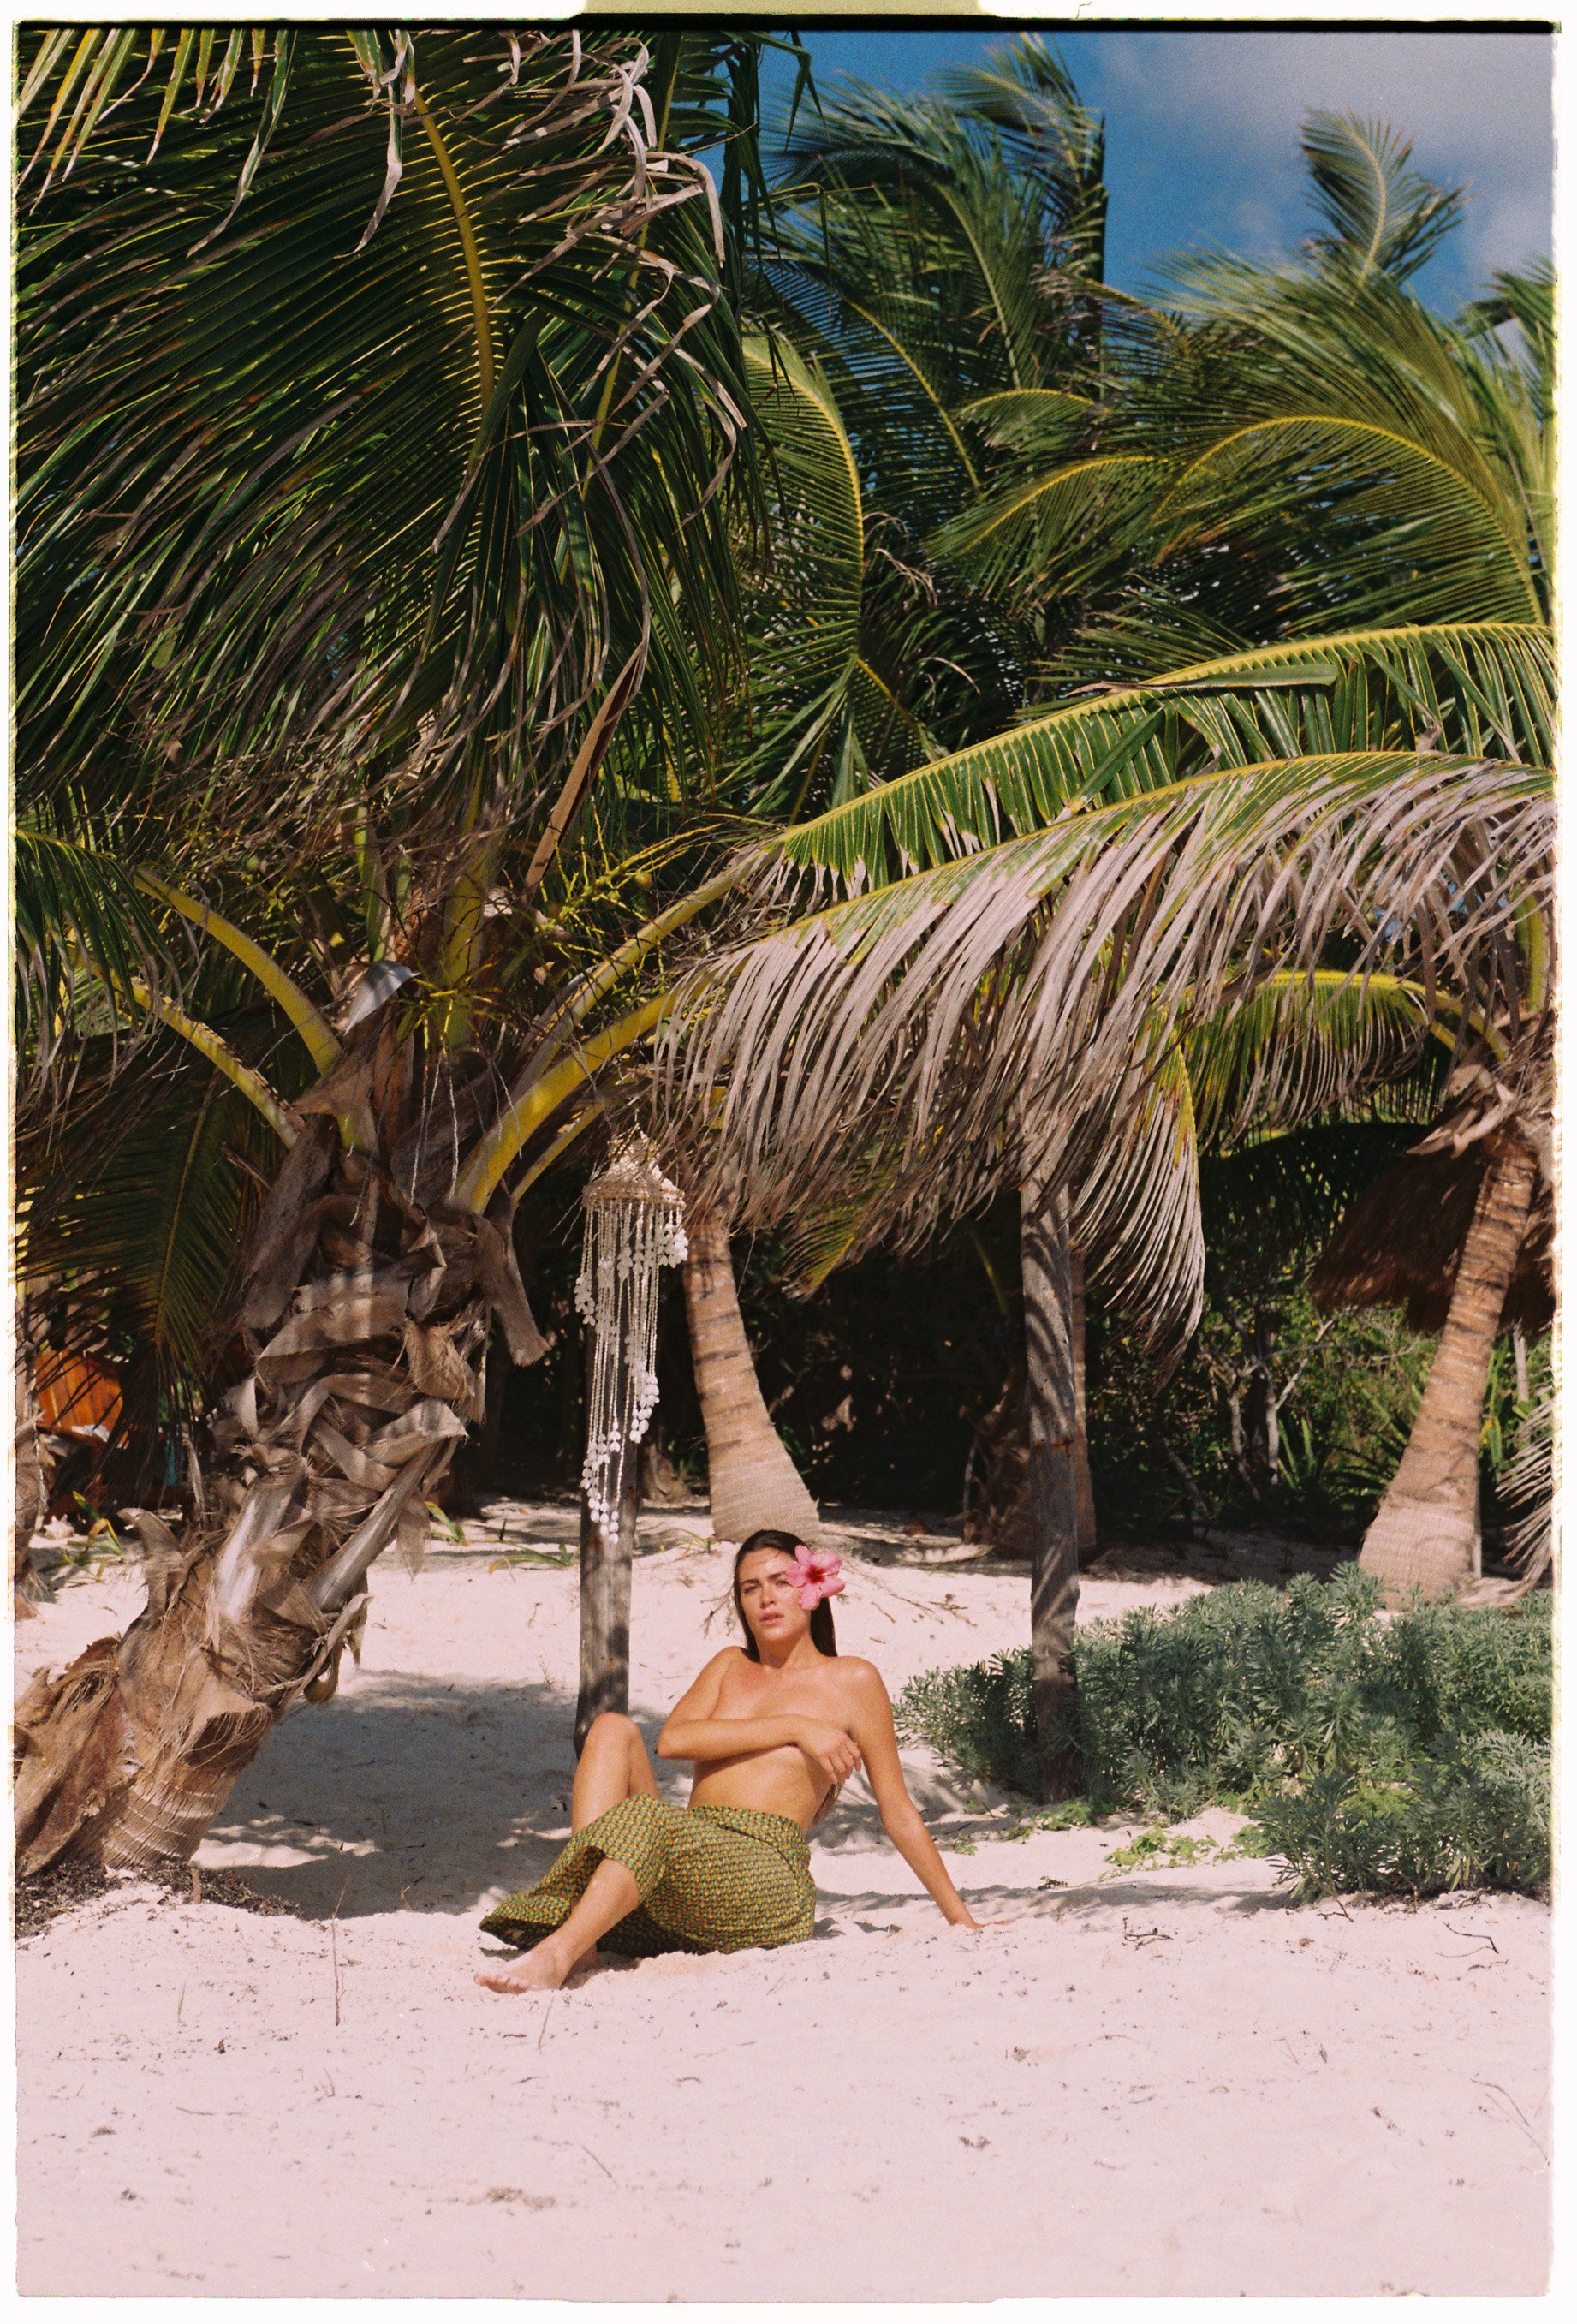  Film photoshoot for Faithfull The Brand captured on untouched beach in Sian Ka’an biosphere reserve in Tulum, Mexico with authentic Mexican cabana. Photographed by Susan Berry on Kodak e100 and Portra 160 35mm film. 